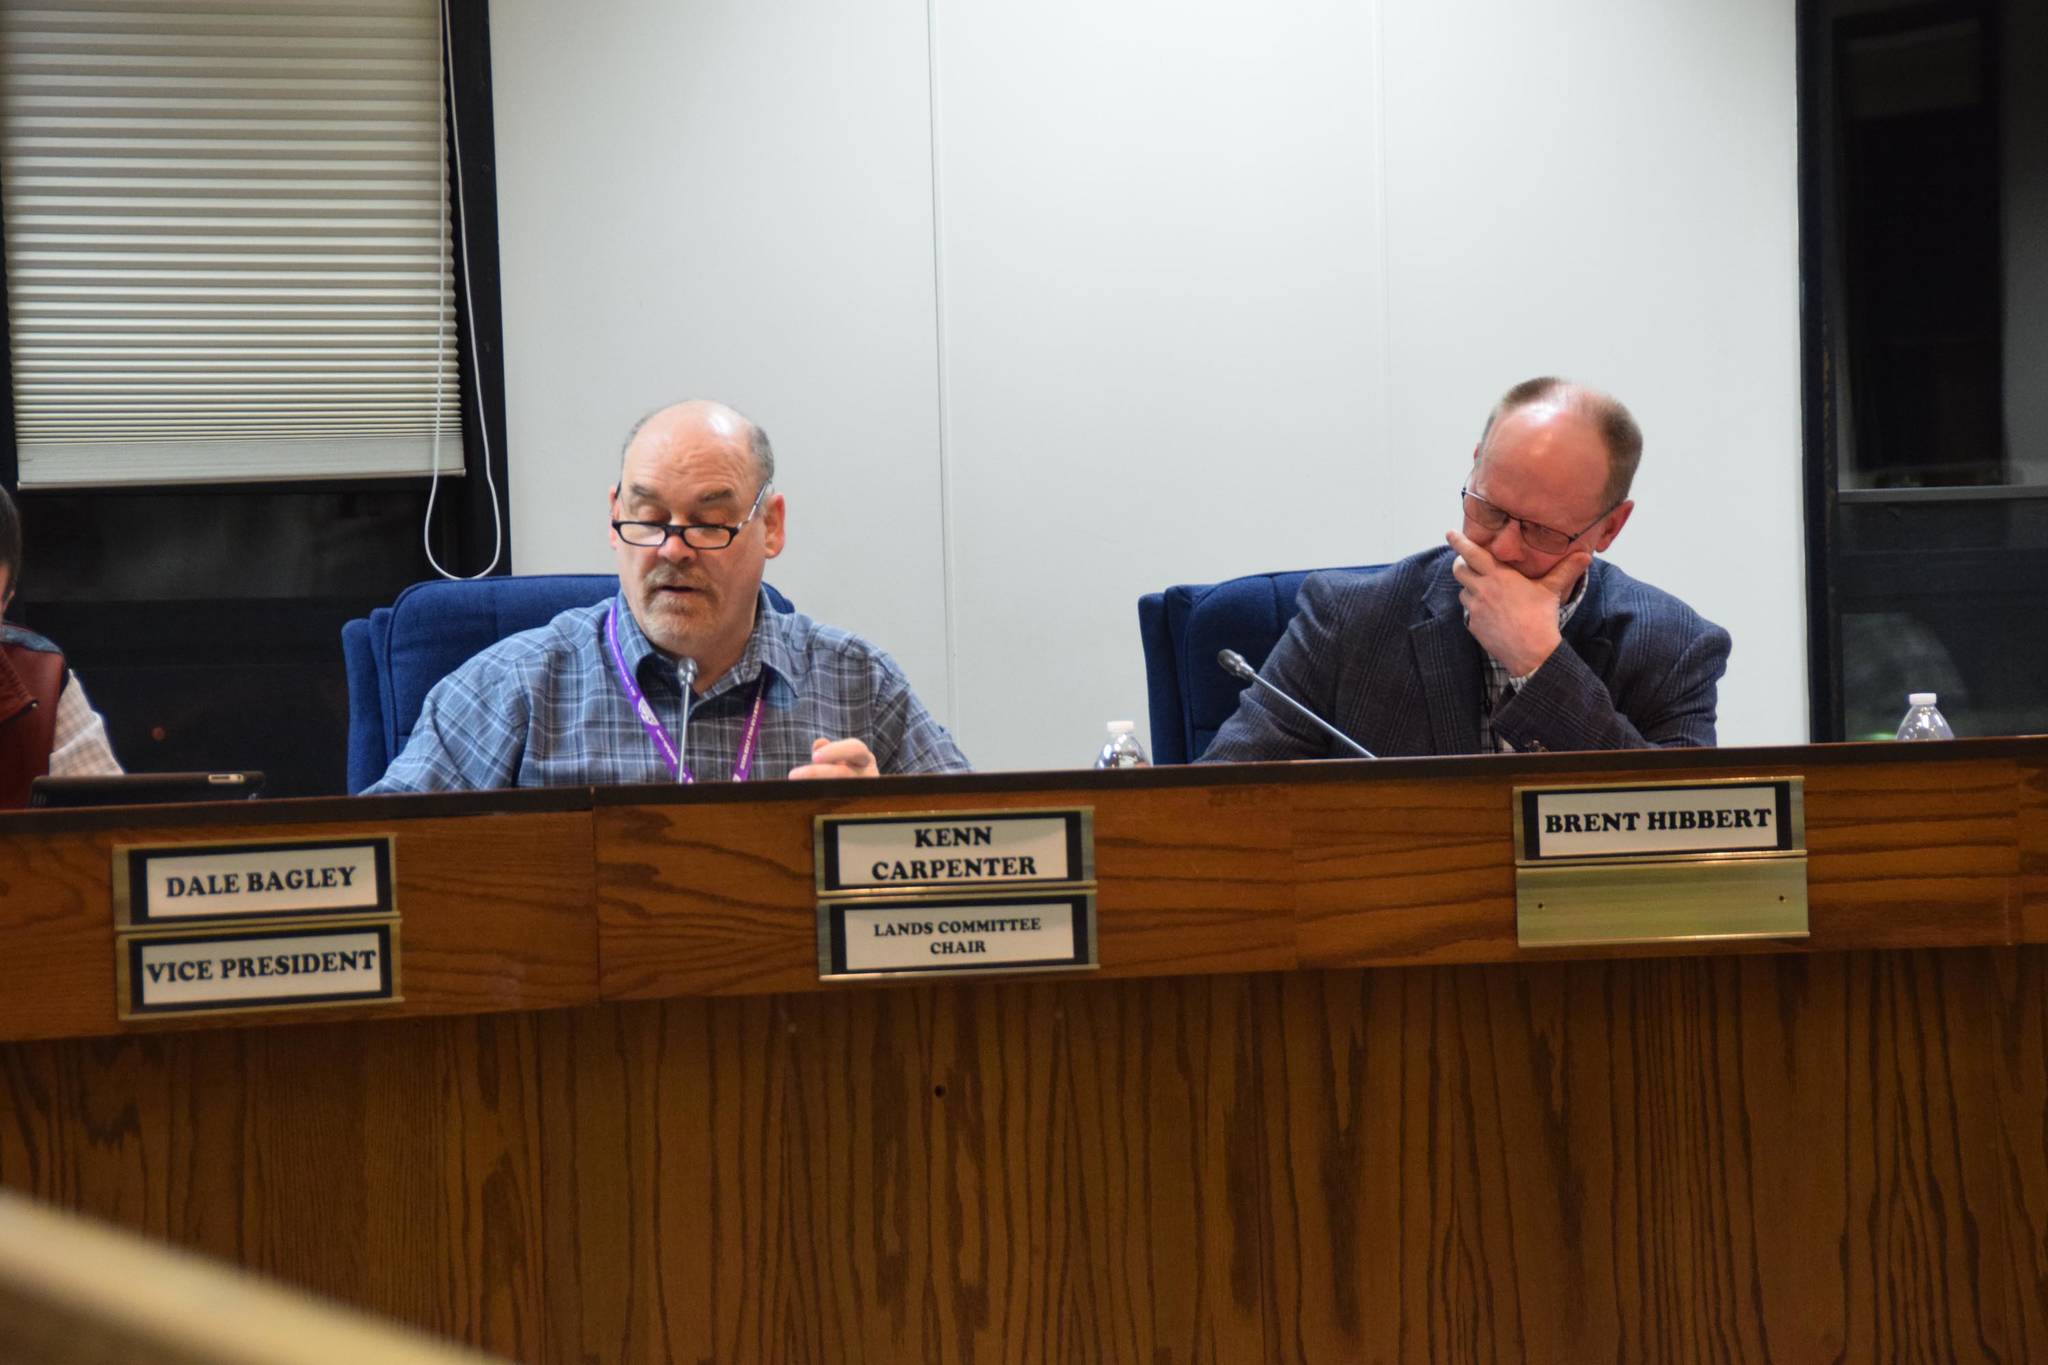 Assembly members Kenn Carpenter and Brent Hibbert discuss Ordinance 2019-03 at the Kenai Peninsula Borough Assembly Meeting in Soldotna on Tuesday, March 5, 2019. (Photo by Brian Mazurek/Peninsula Clarion)